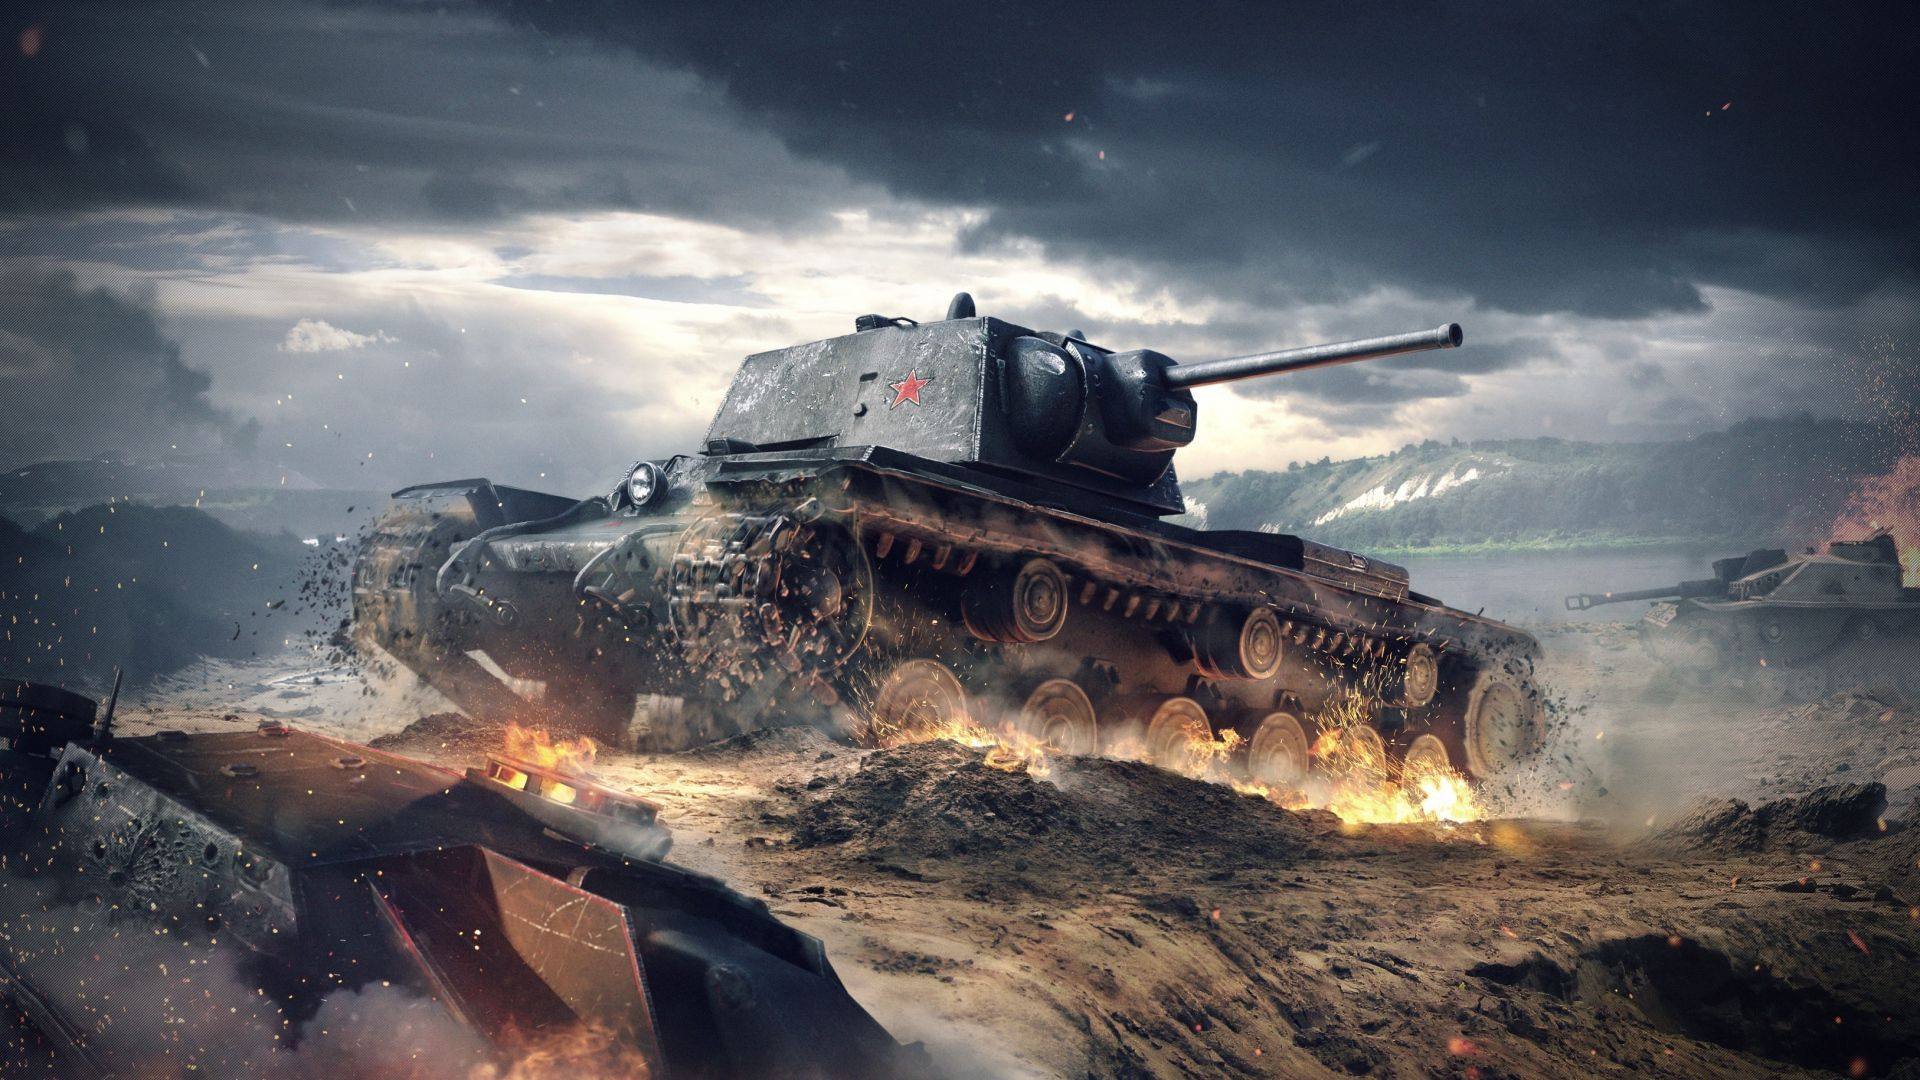 1920x1080 World of Tanks Blitz Wallpapers Top Free World of Tanks Blitz Backgrounds